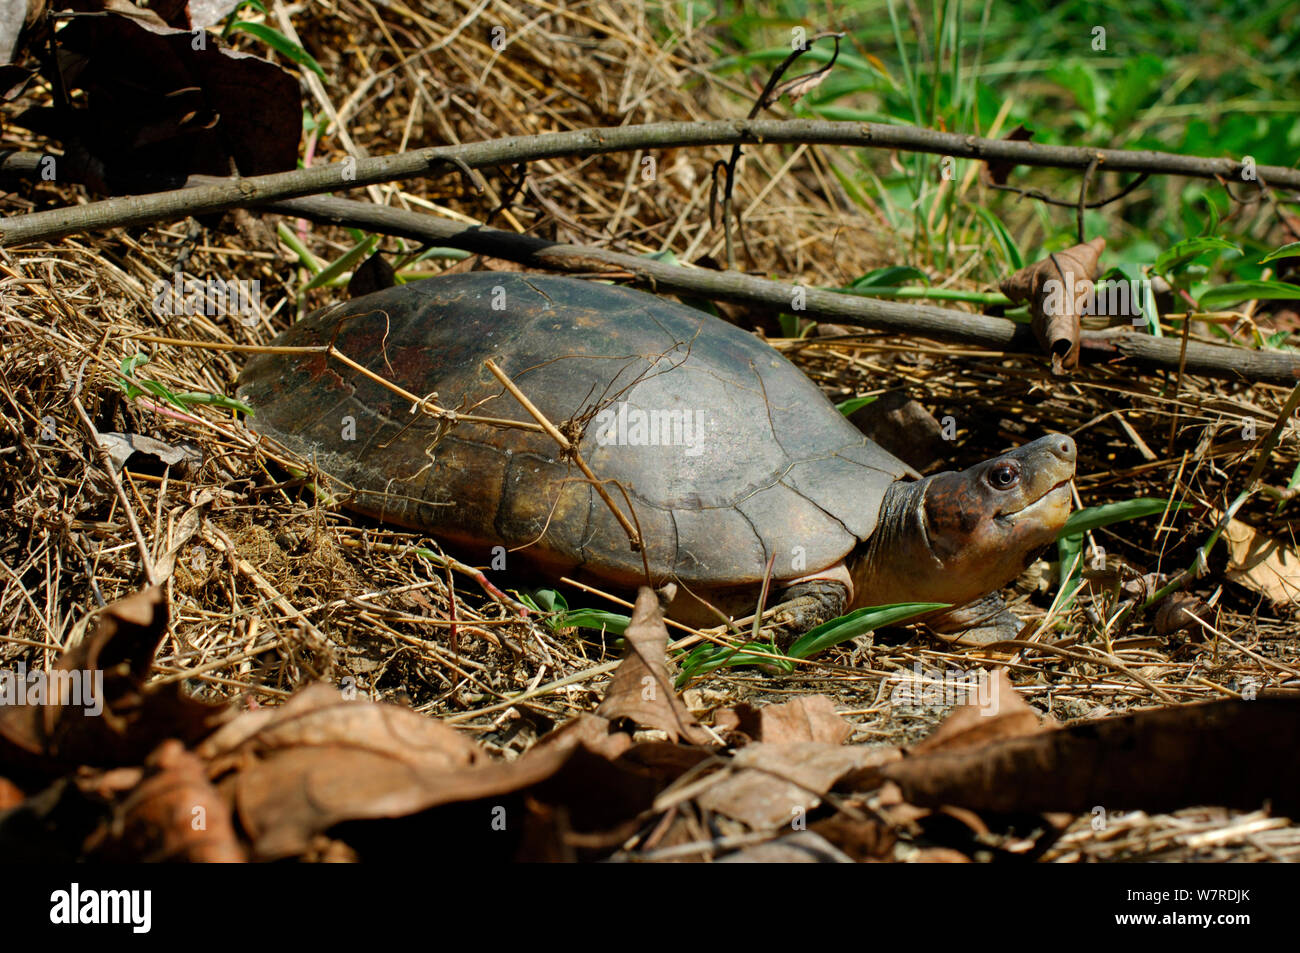 Philippine Forest Turtle Facts, Diet, Habitat Pictures On, 49% OFF